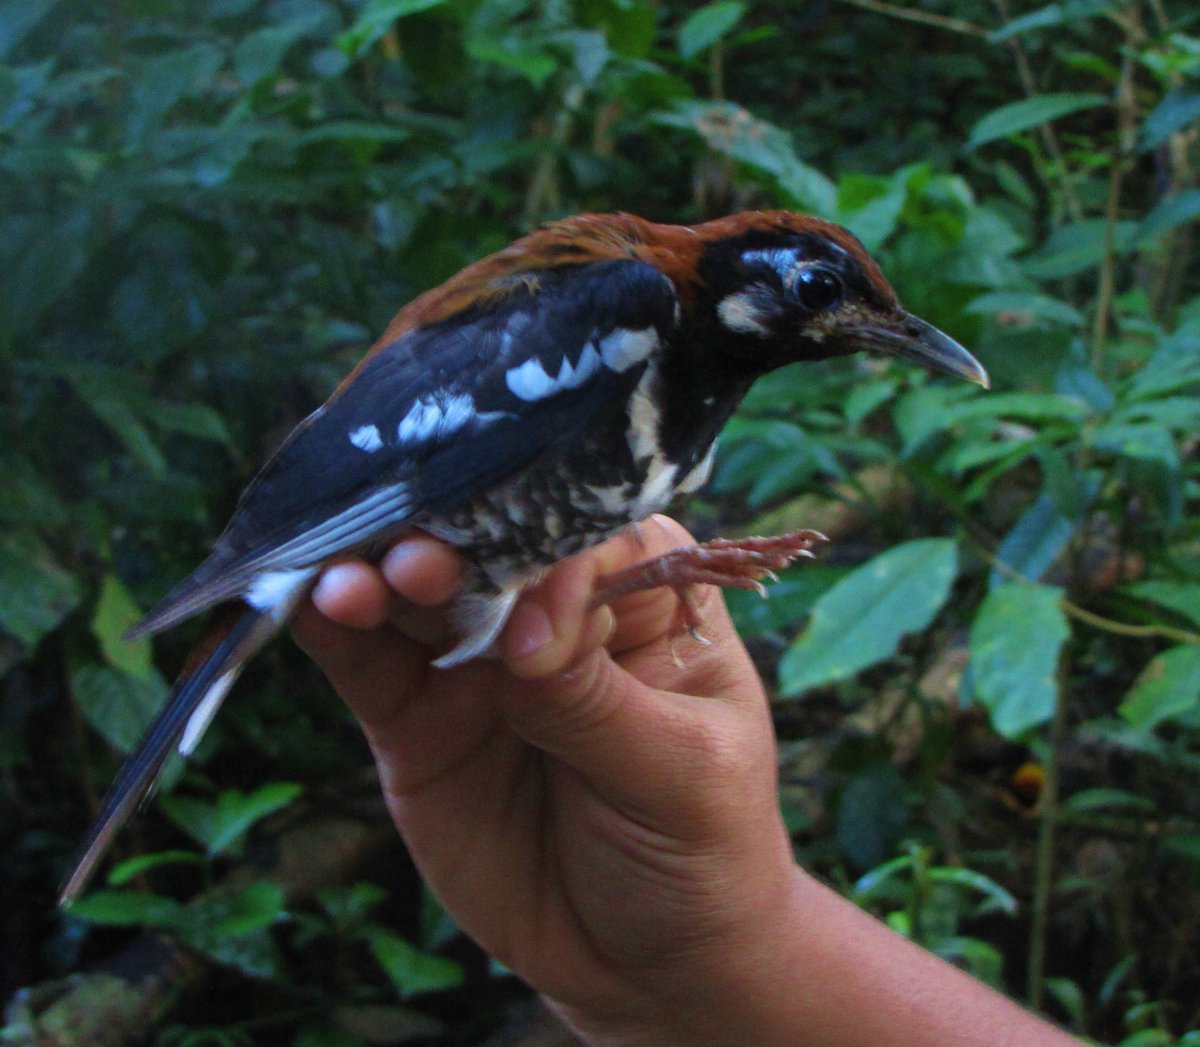 This early paper can be found here. Red-backed Thrush photo attached, although this is from Buton Island, rather than the Kabaena ssp.!  https://www.researchgate.net/publication/215909242_A_new_subspecies_of_Red-backed_Thrush_Zoothera_erythronota_kabaena_subsp_nov_Muscicapidae_Turdidae_from_Kabaena_island_Indonesia